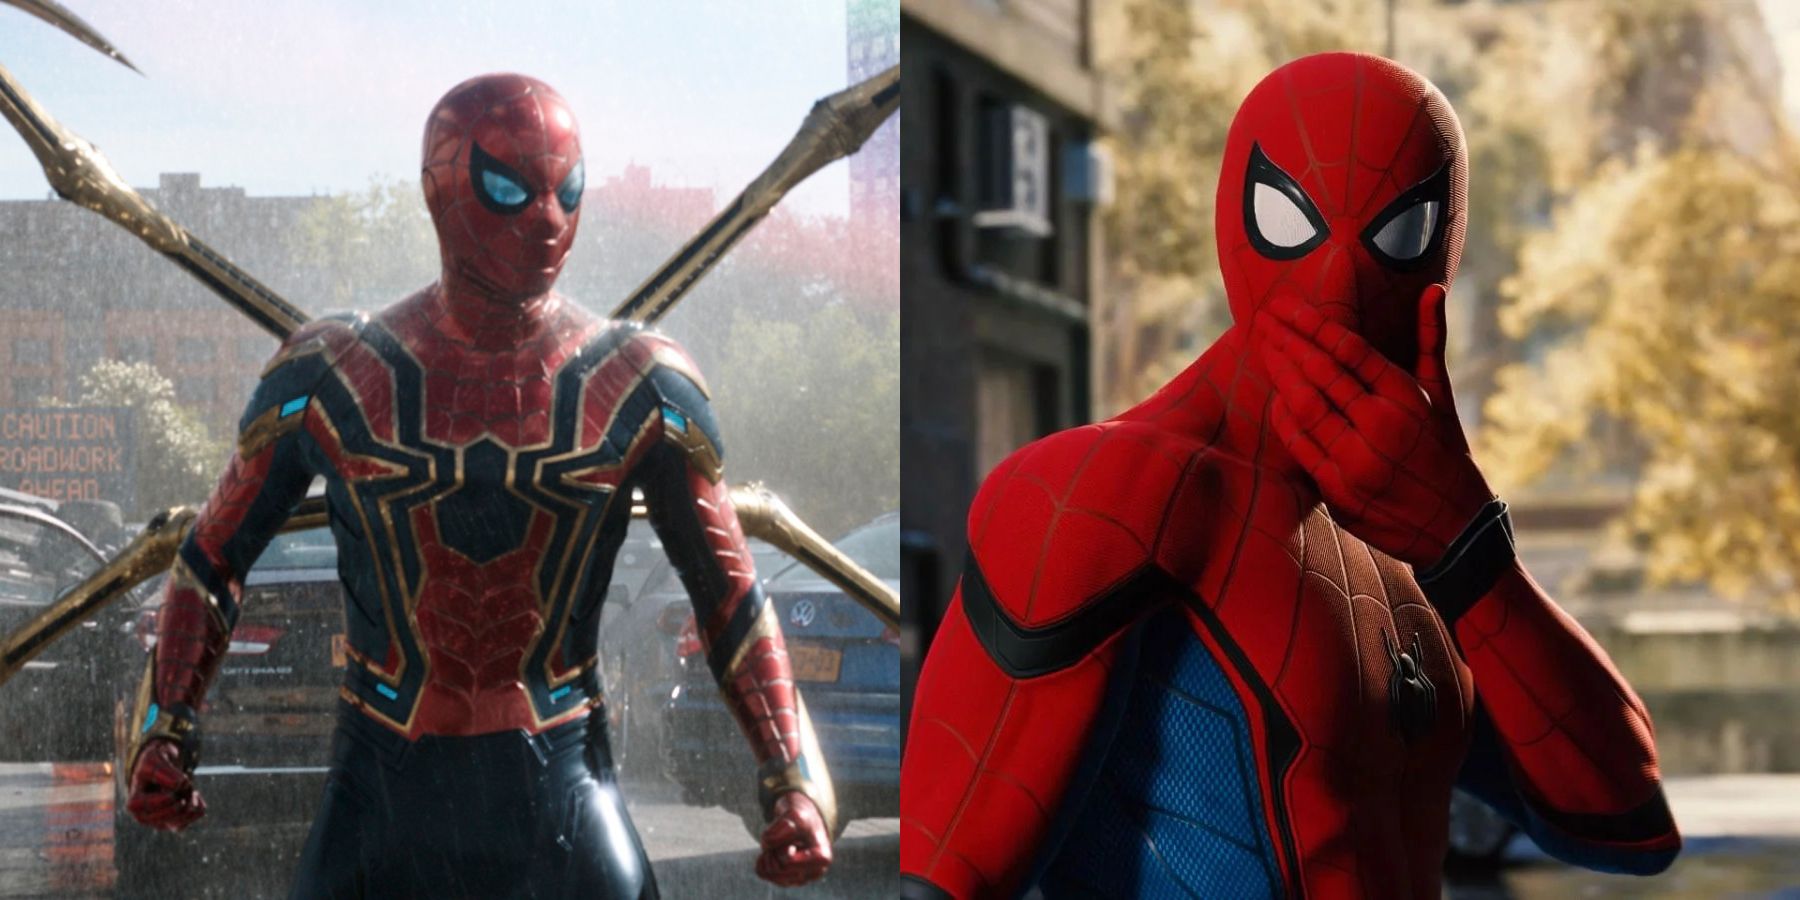 MCU - The Direct on X: Following #SpiderManNoWayHome's release